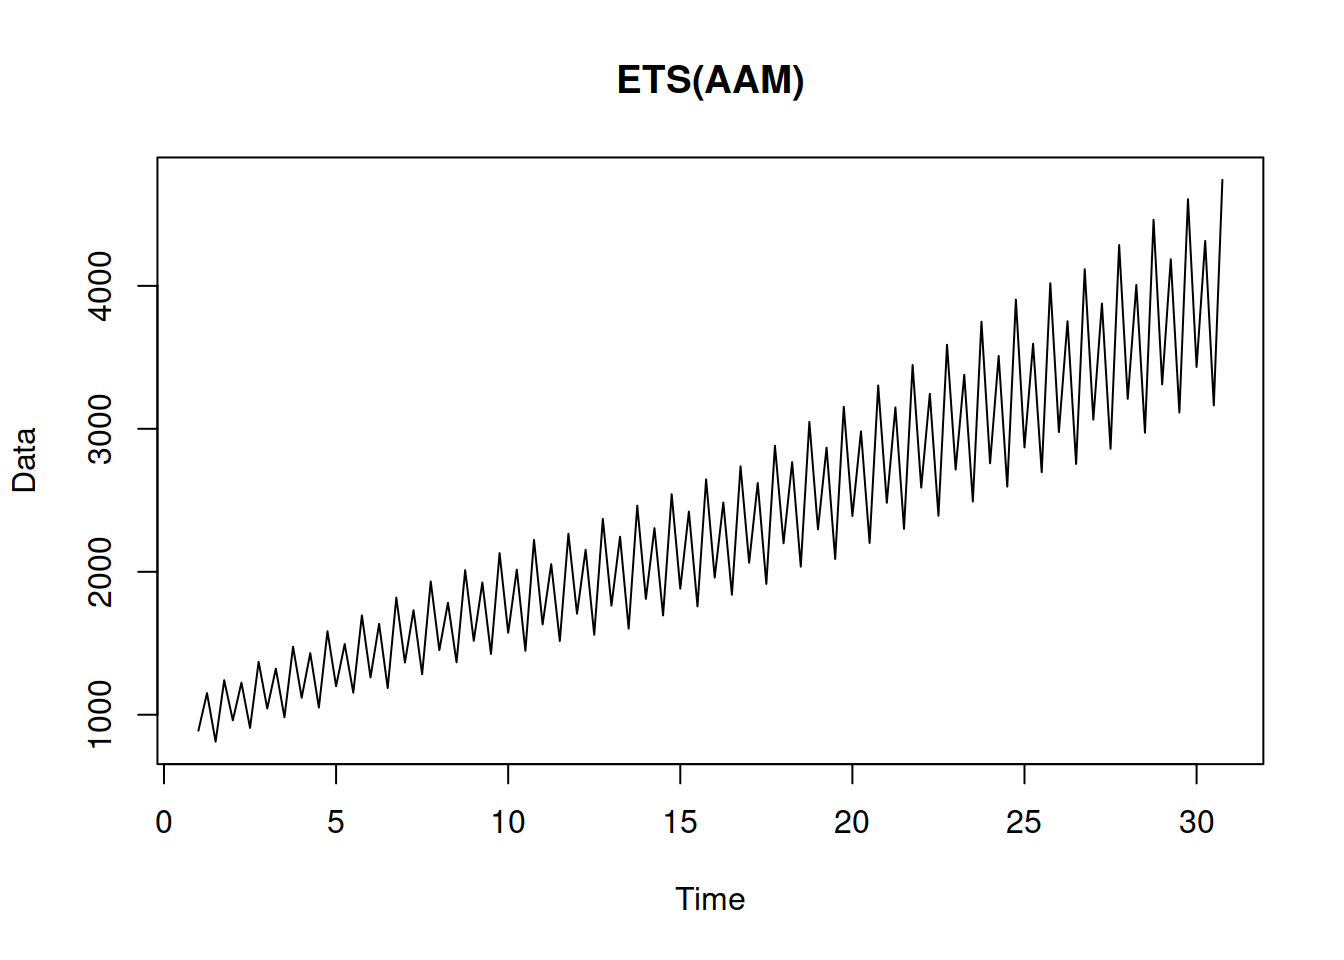 An example of ETS(A,A,M) data.